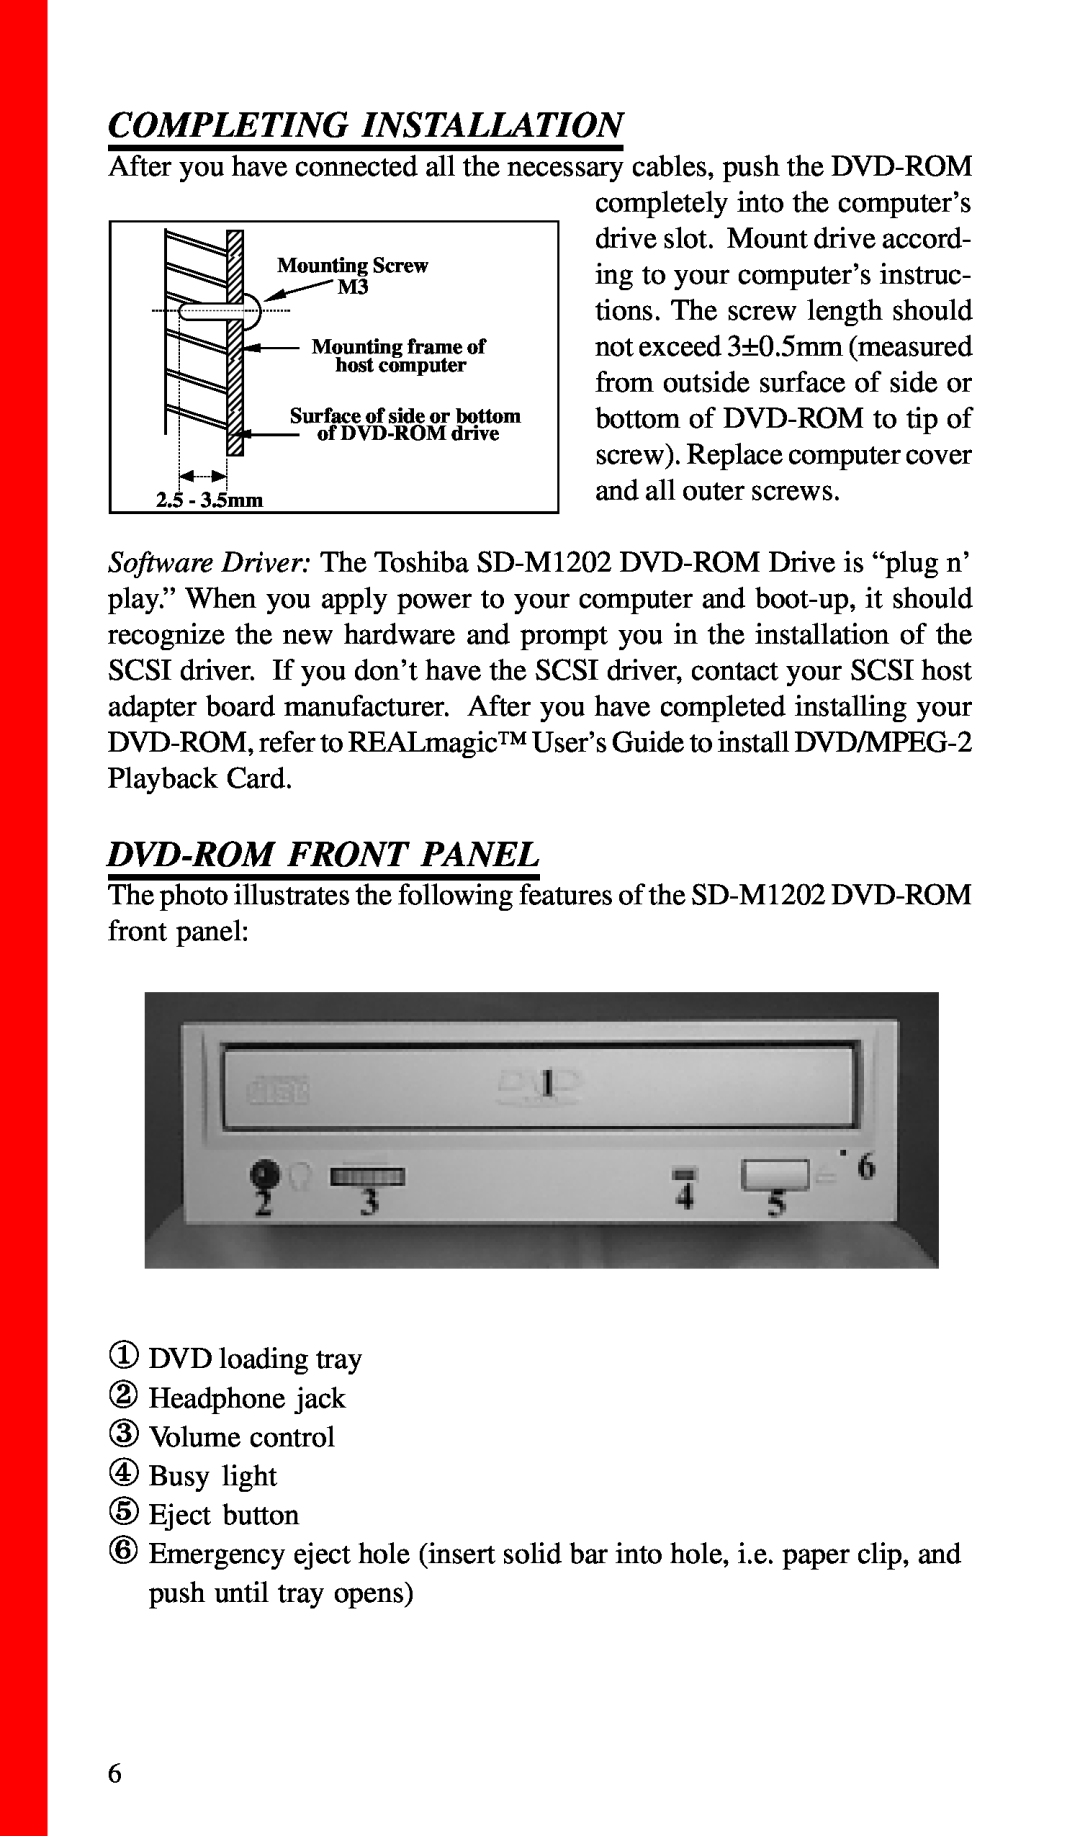 Toshiba SD-M1201 installation instructions Completing Installation, Dvd-Rom Front Panel 